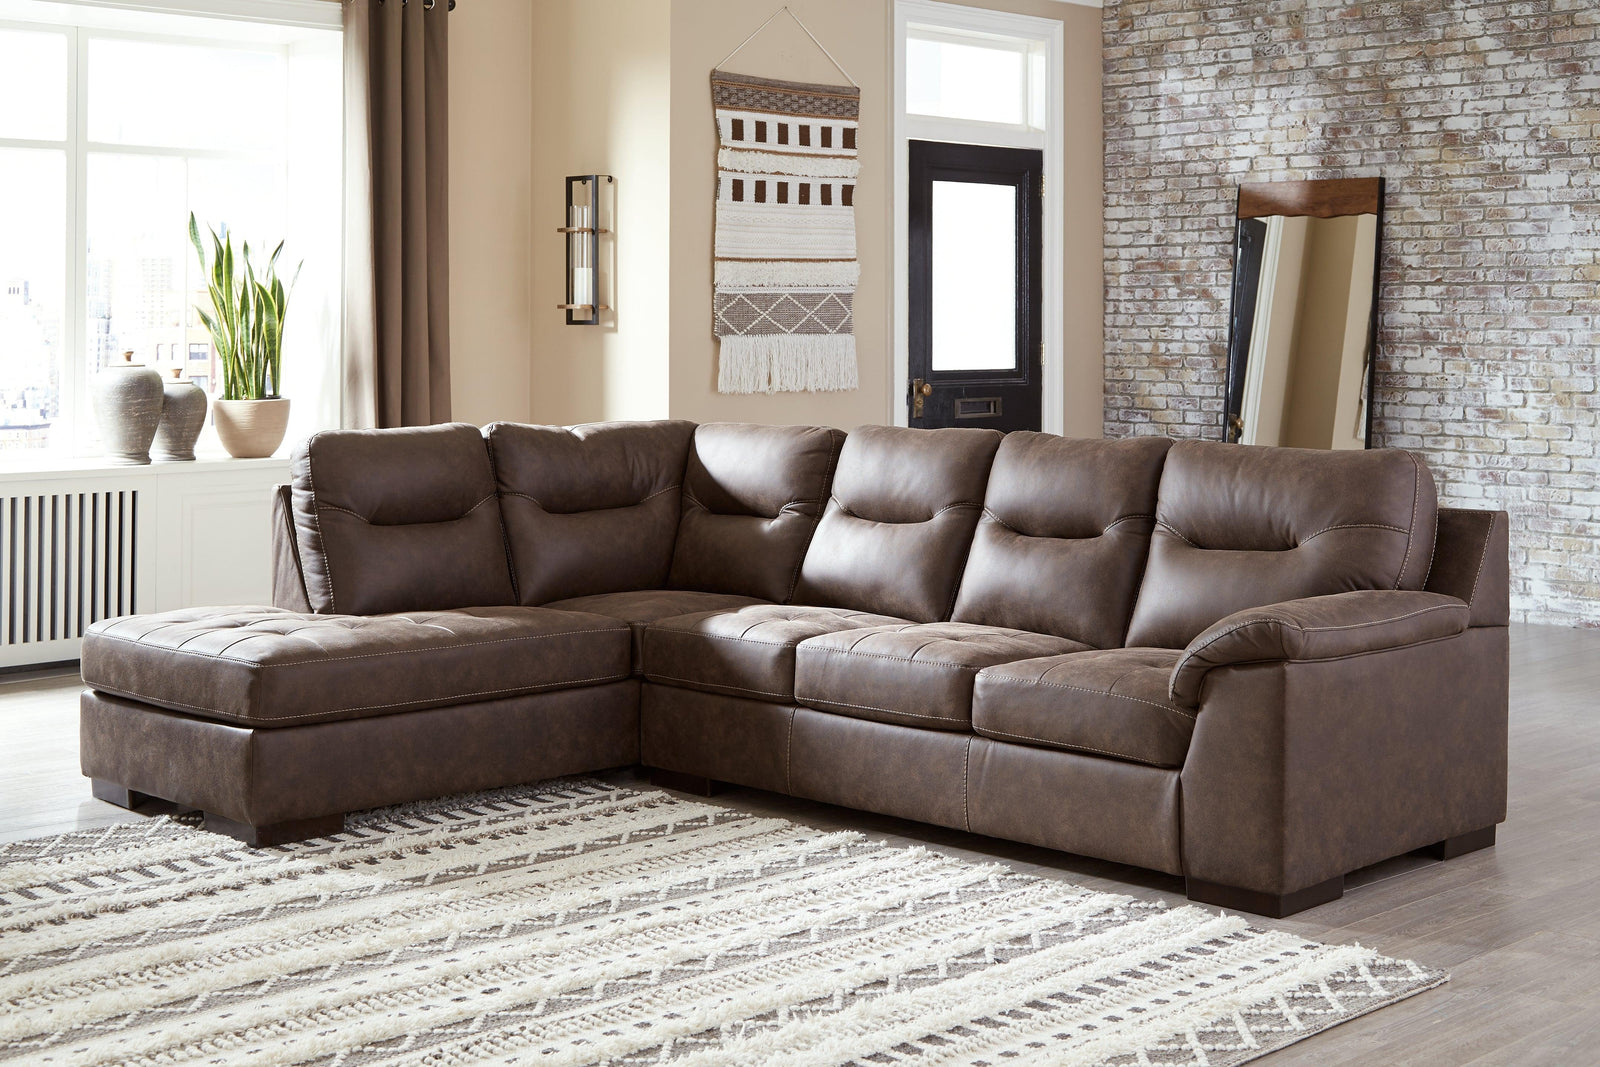 Maderla Walnut 2-Piece Sectional With Chaise 62002S1